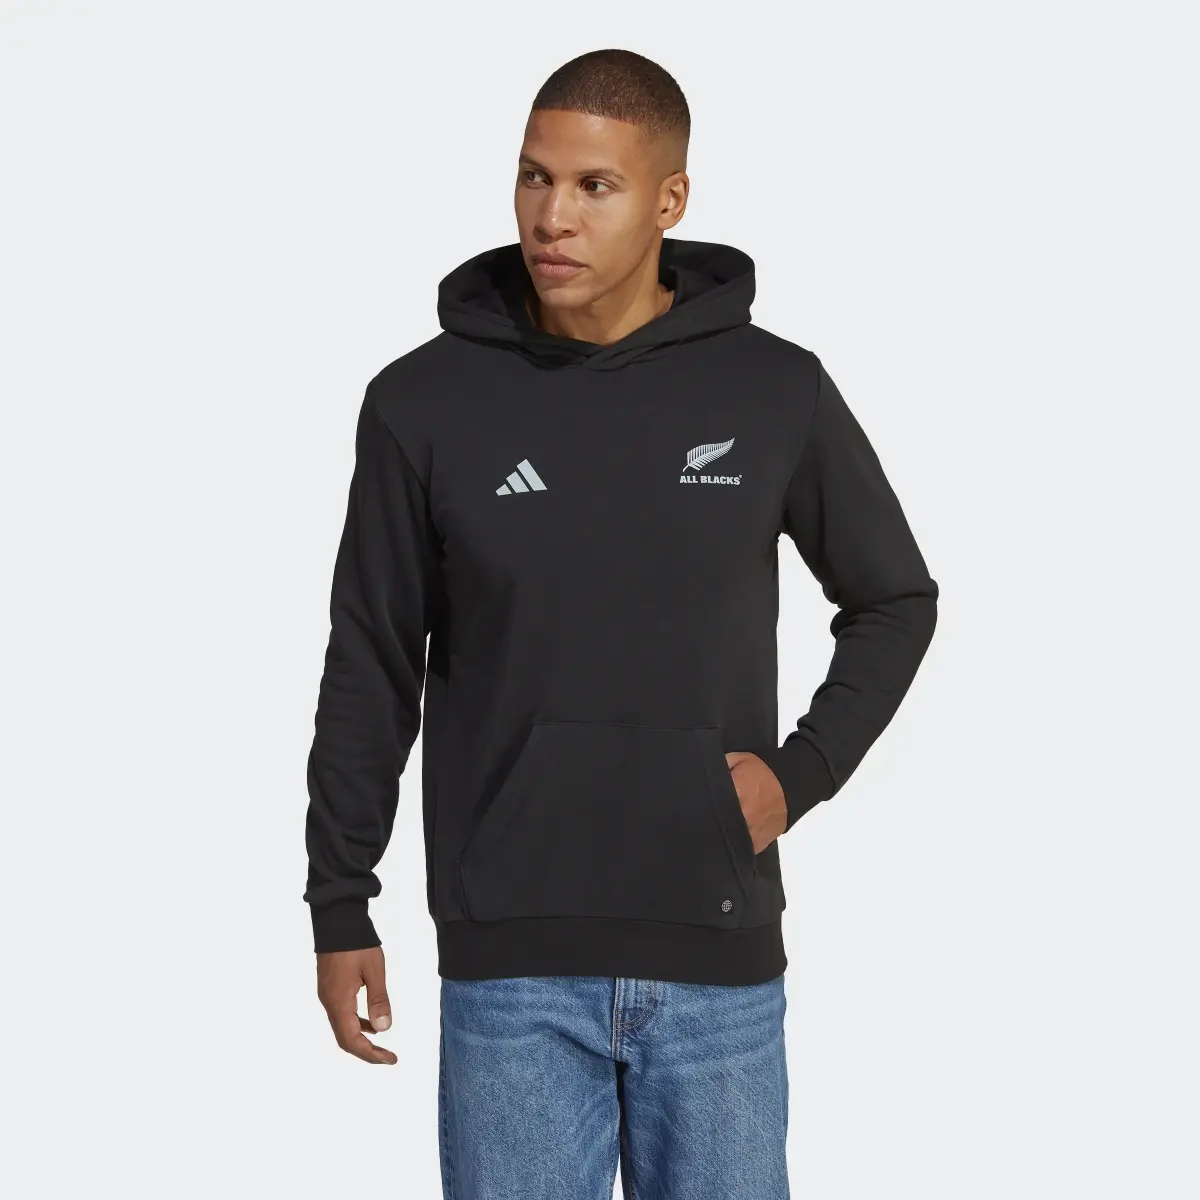 Adidas All Blacks Rugby Supporters Hoodie. 2